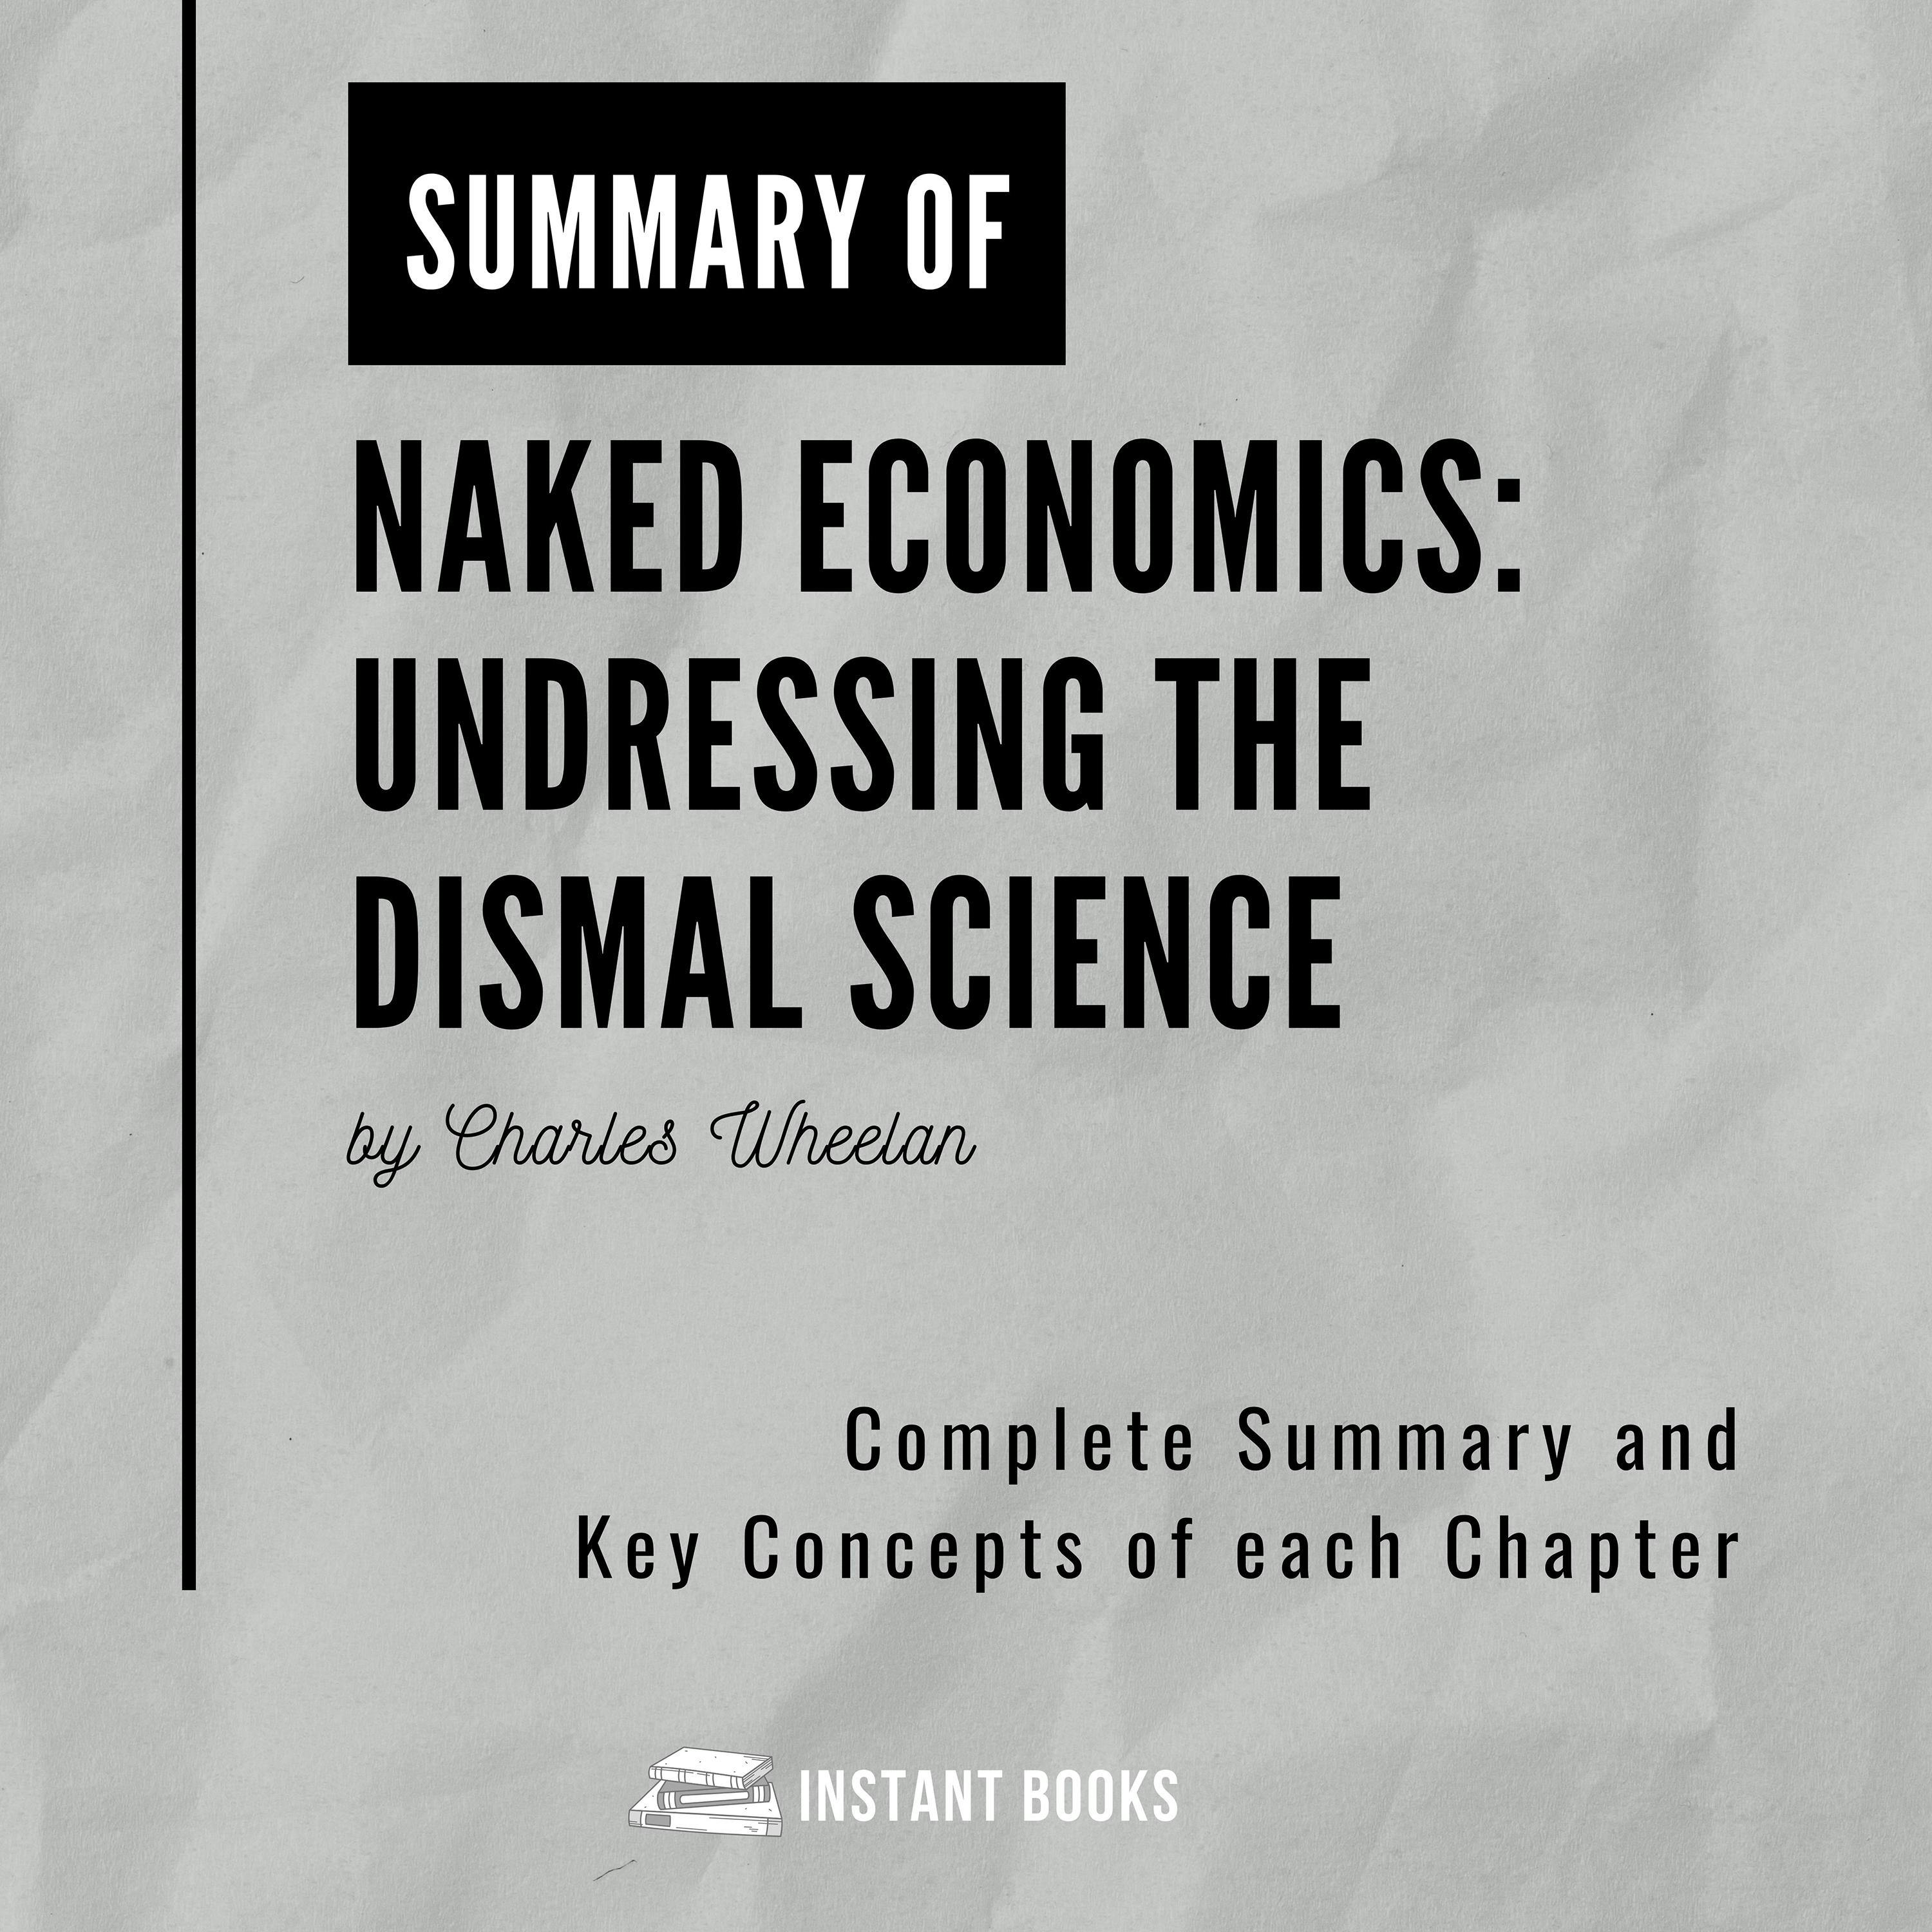 Summary of Naked Economics: Undressing the Dismal Science by Charlees Wheelan: Complete Summary and Key Concepts of each Chapter - Istant Books